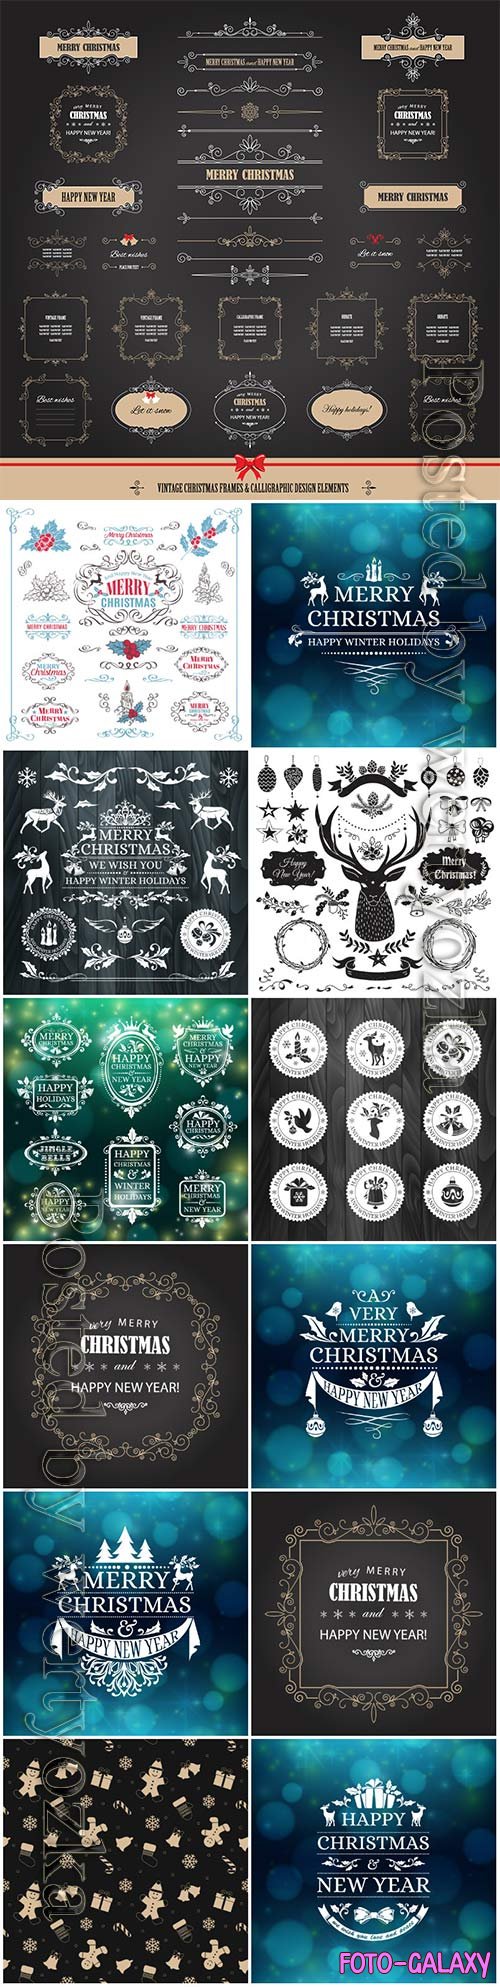 Christmas and New Year decorative elements in vector